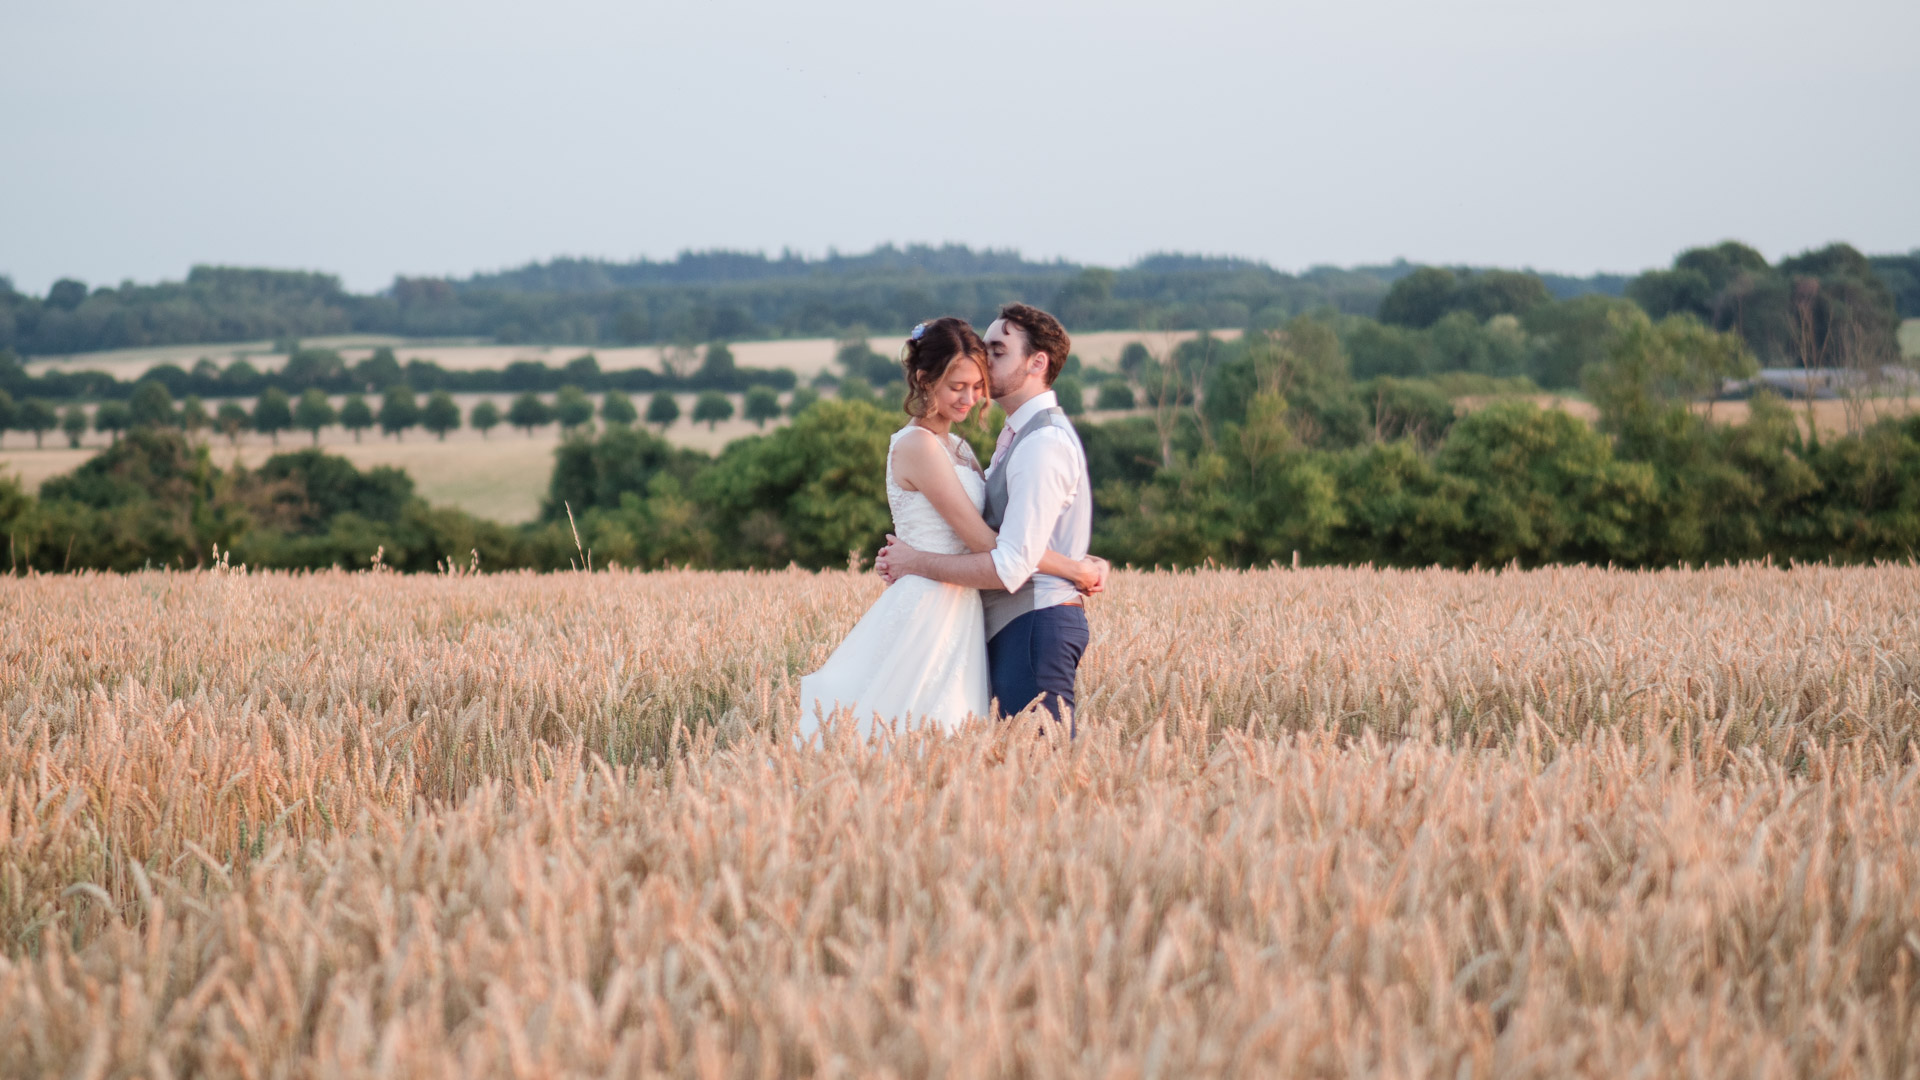 A Dorset country church wedding for Jade and Jacob